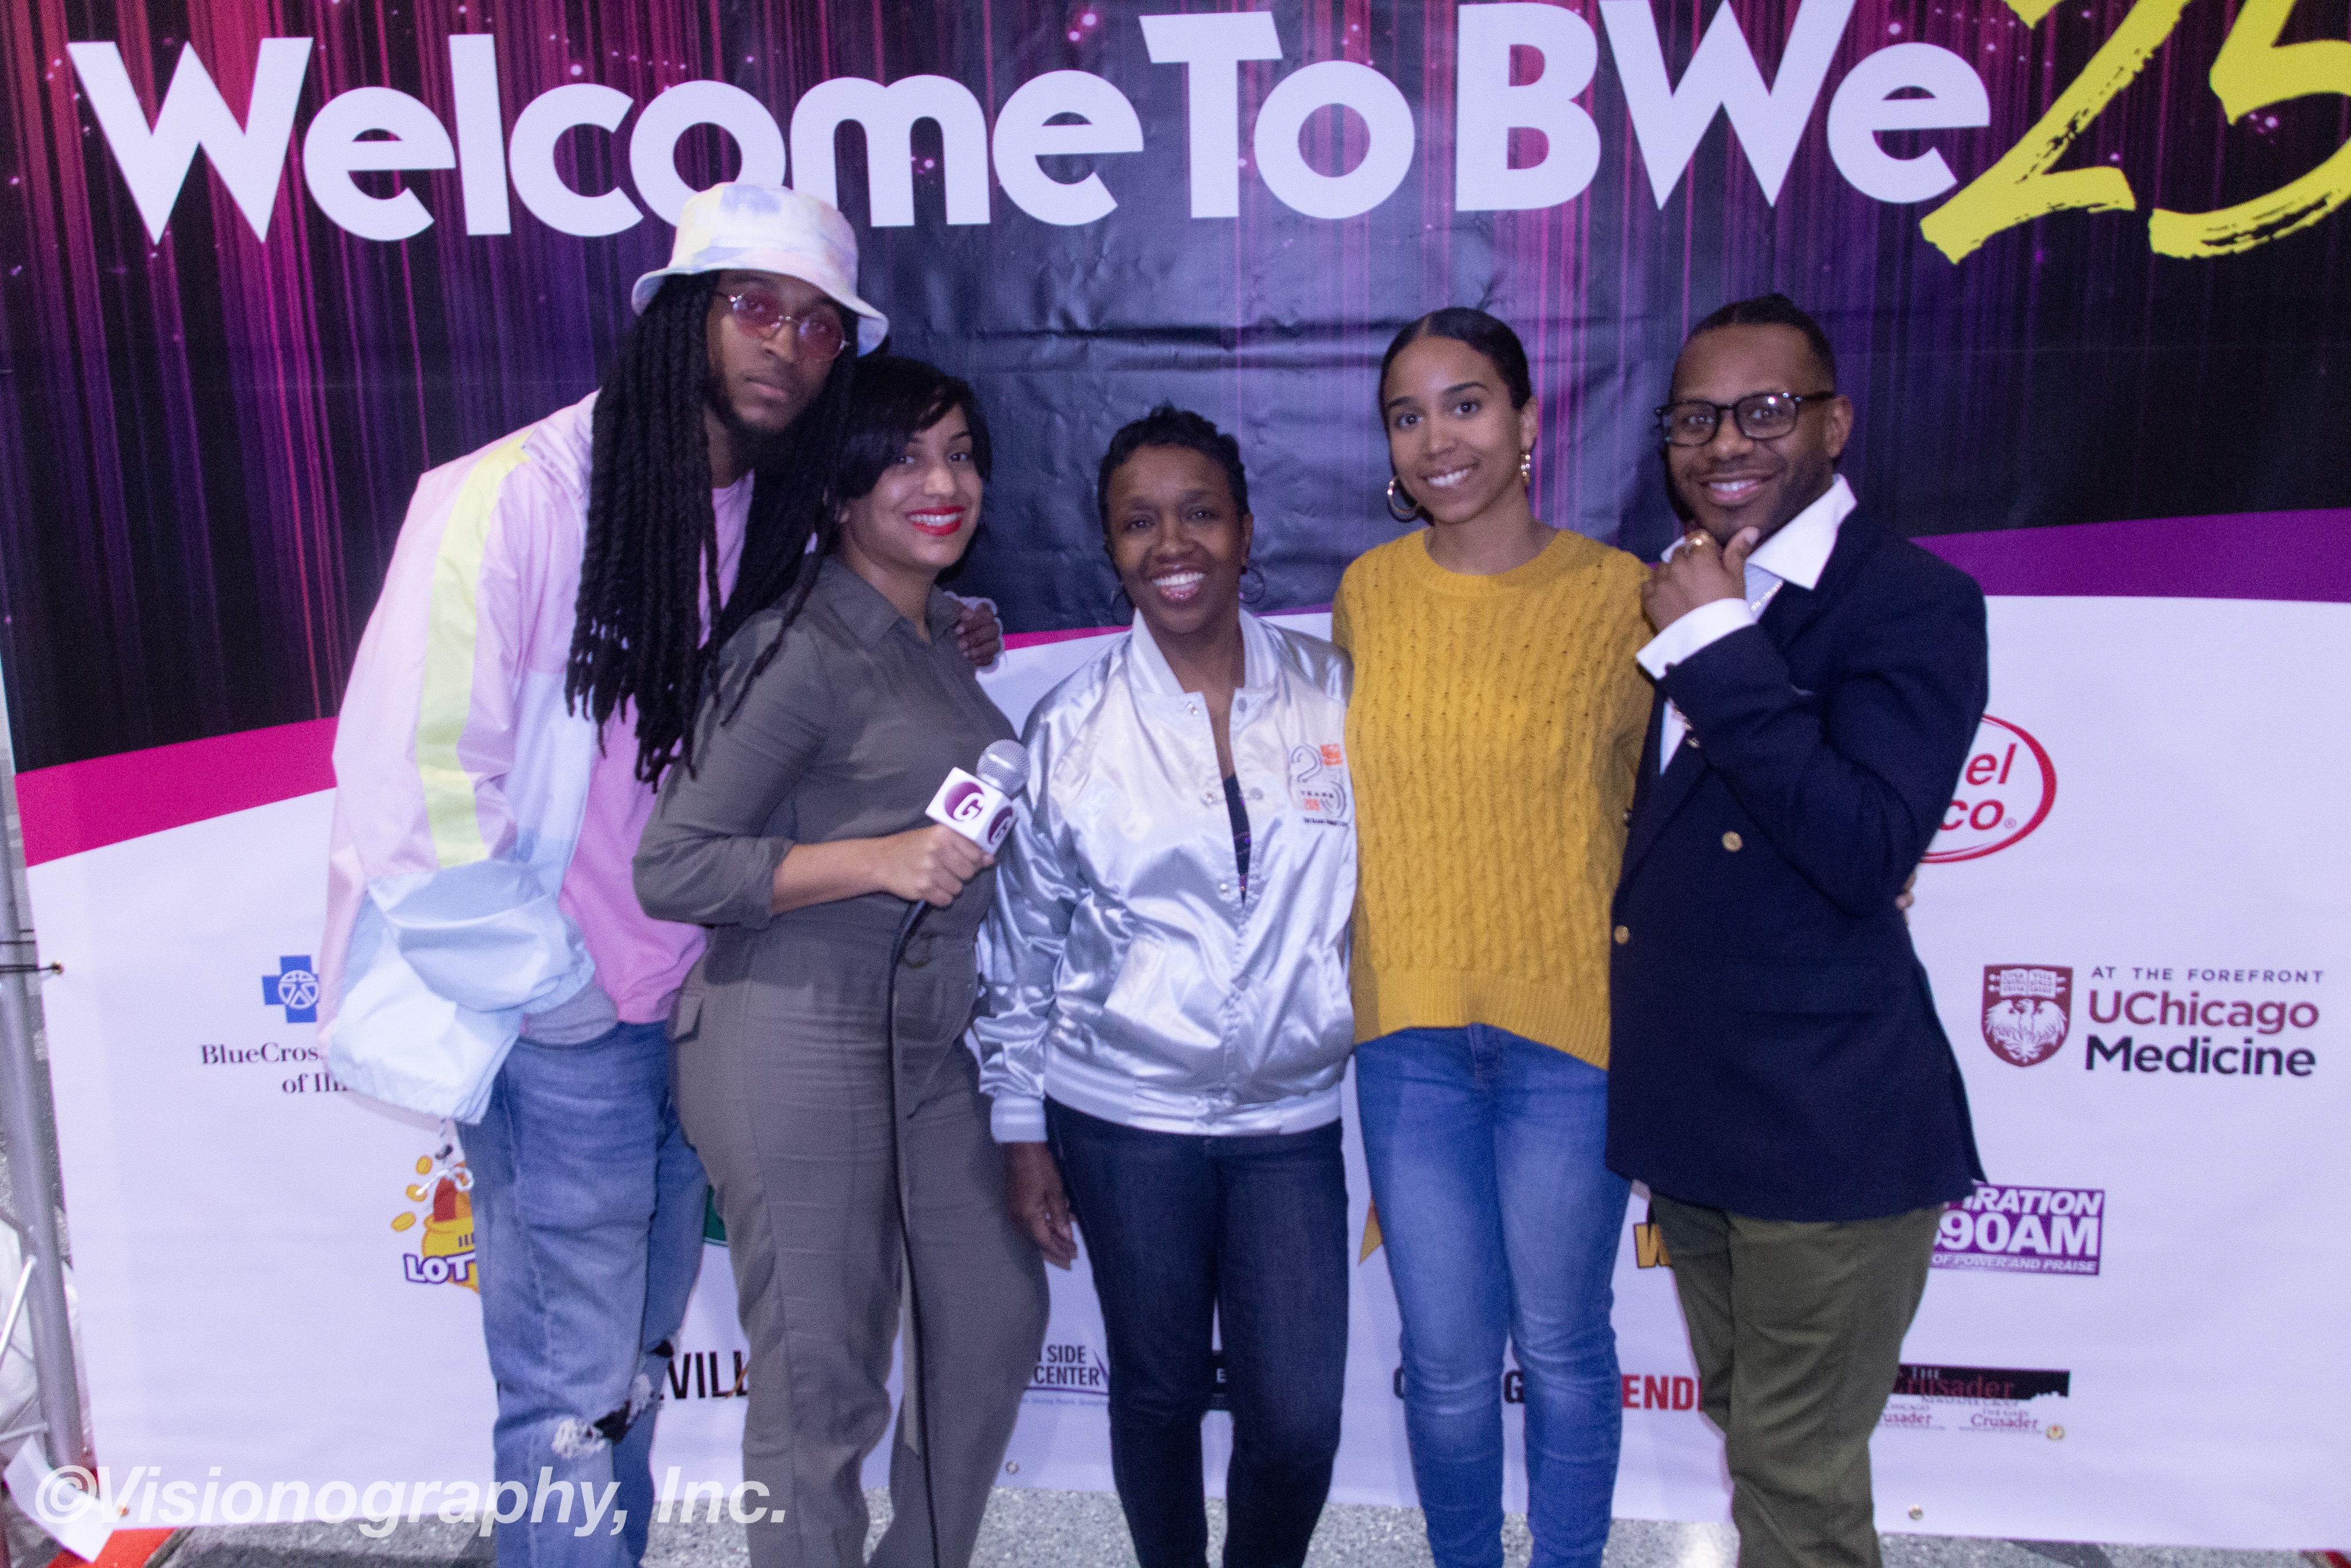 Donnel Perry, Ajshra Harper, Merry Green, Briea Chanel and Minister Israel Azaiah